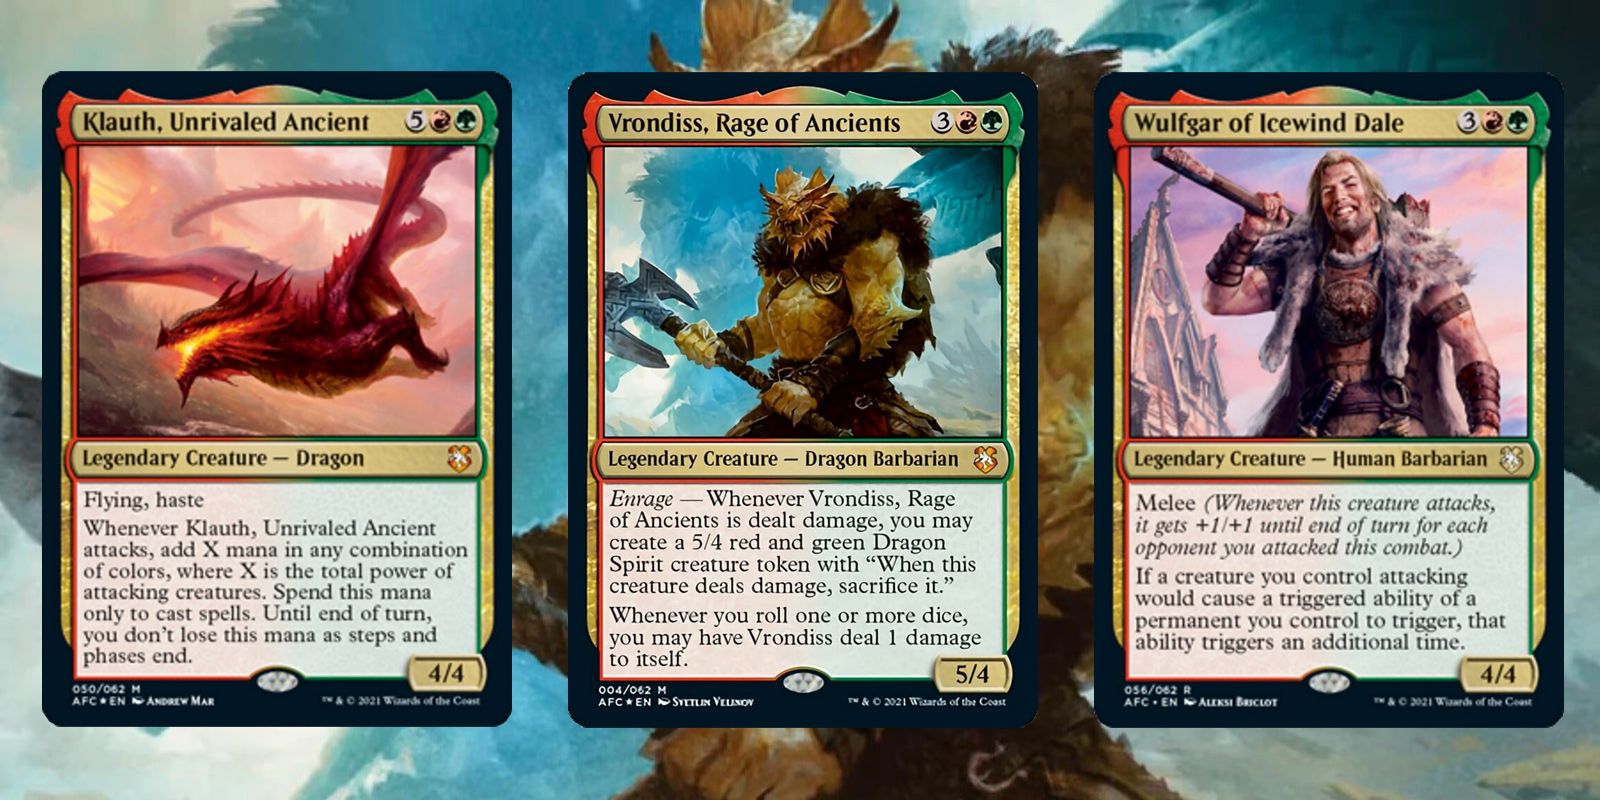 Three Magic: The Gathering cards: Klauth, Unrivaled Ancient, Vrondiss Rage of Ancients and Wulfgar of Icewind Dale.